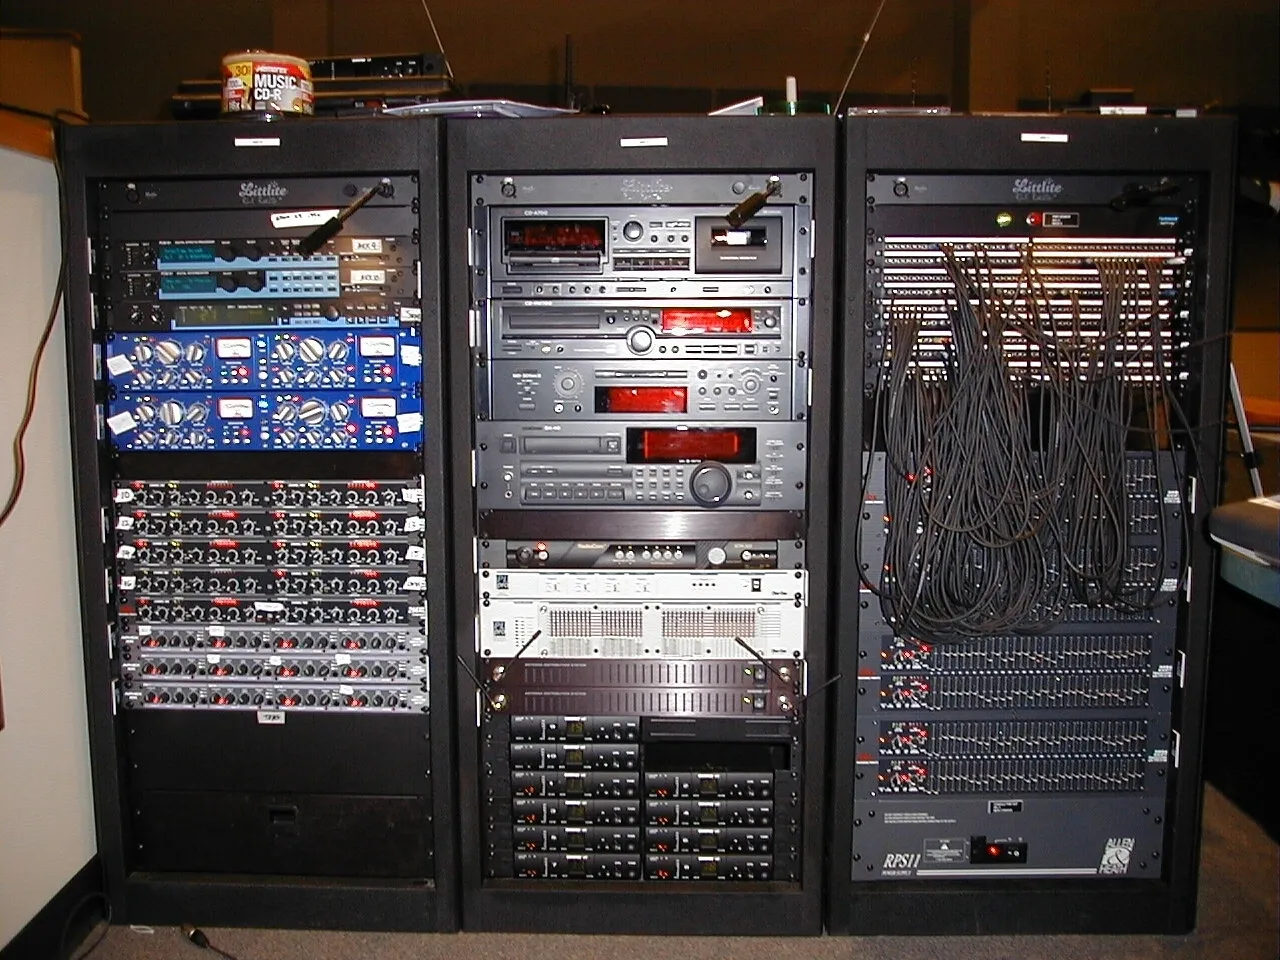 A large rack of computer equipment sitting on top of a floor.